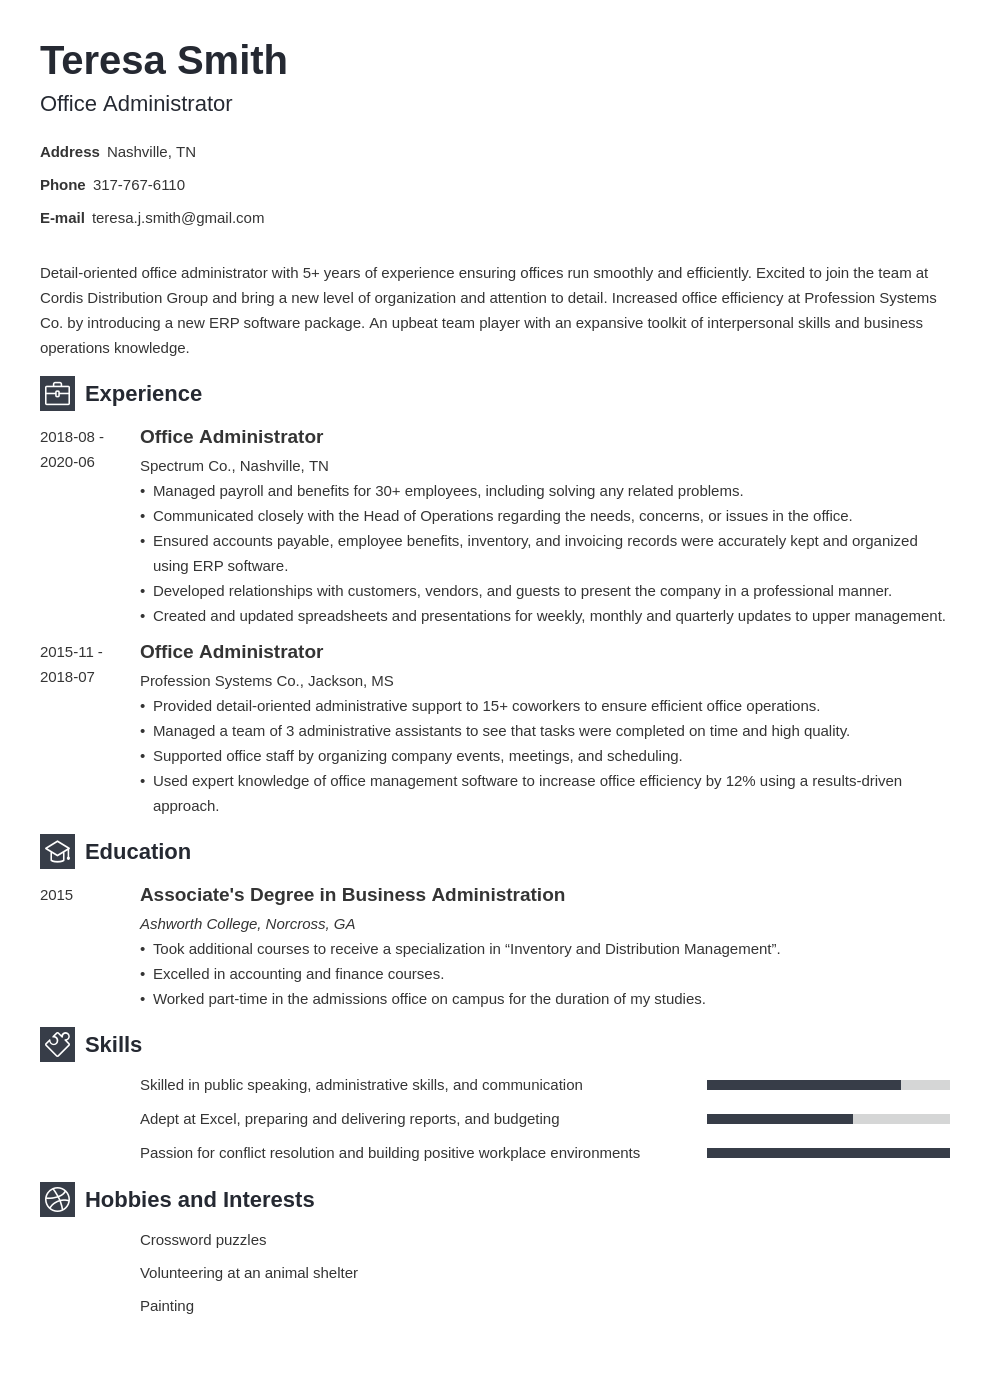 Office Administrator Resume: Examples and Guide [10+ Tips]